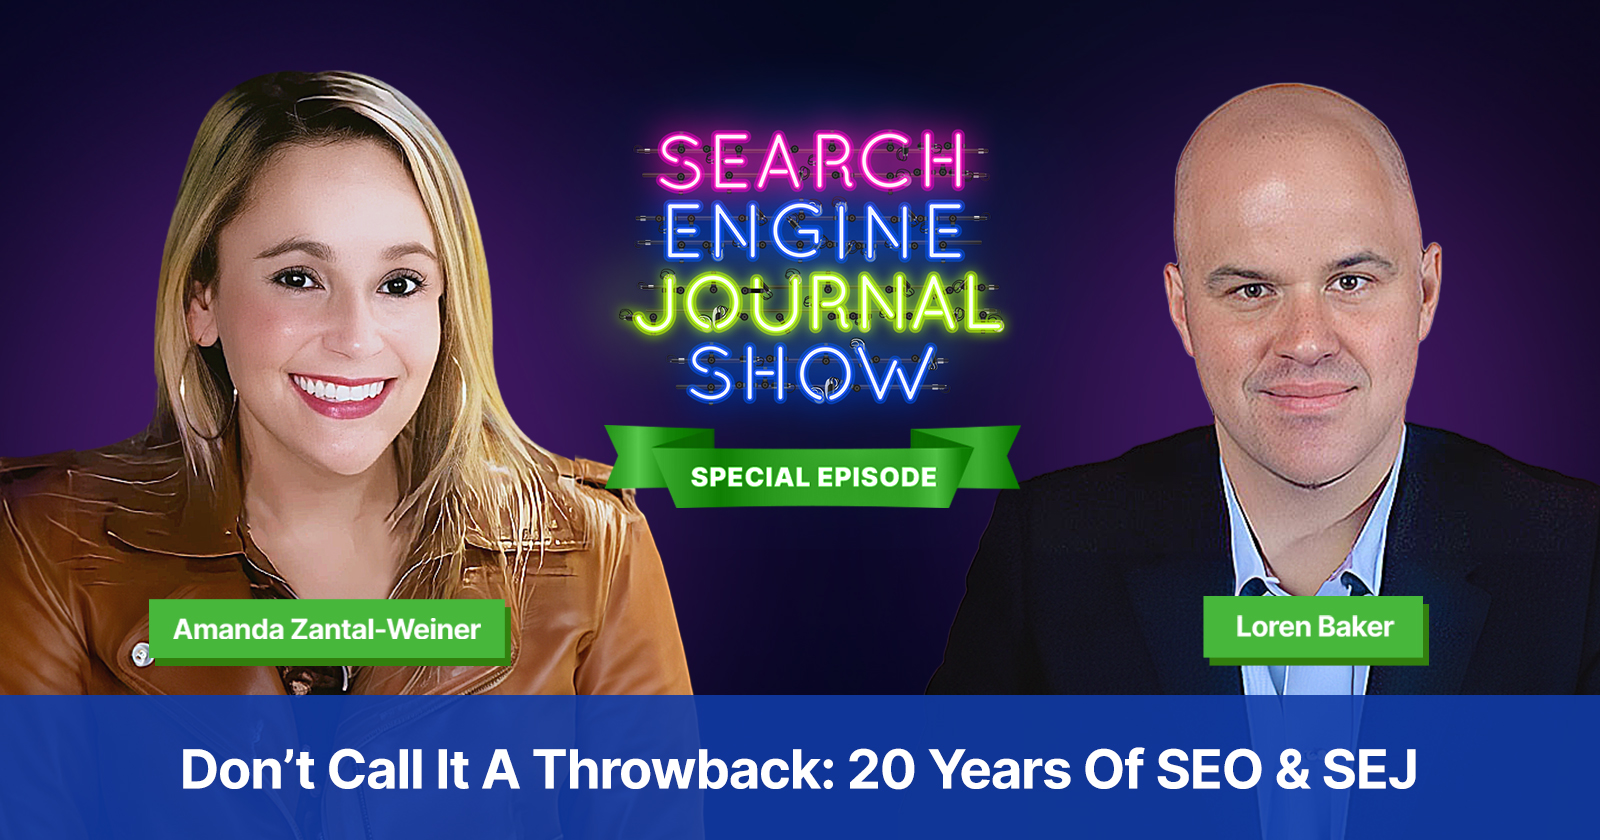 Don’t Call It a Throwback: 20 Years of SEO & Search Engine Journal [Podcast]